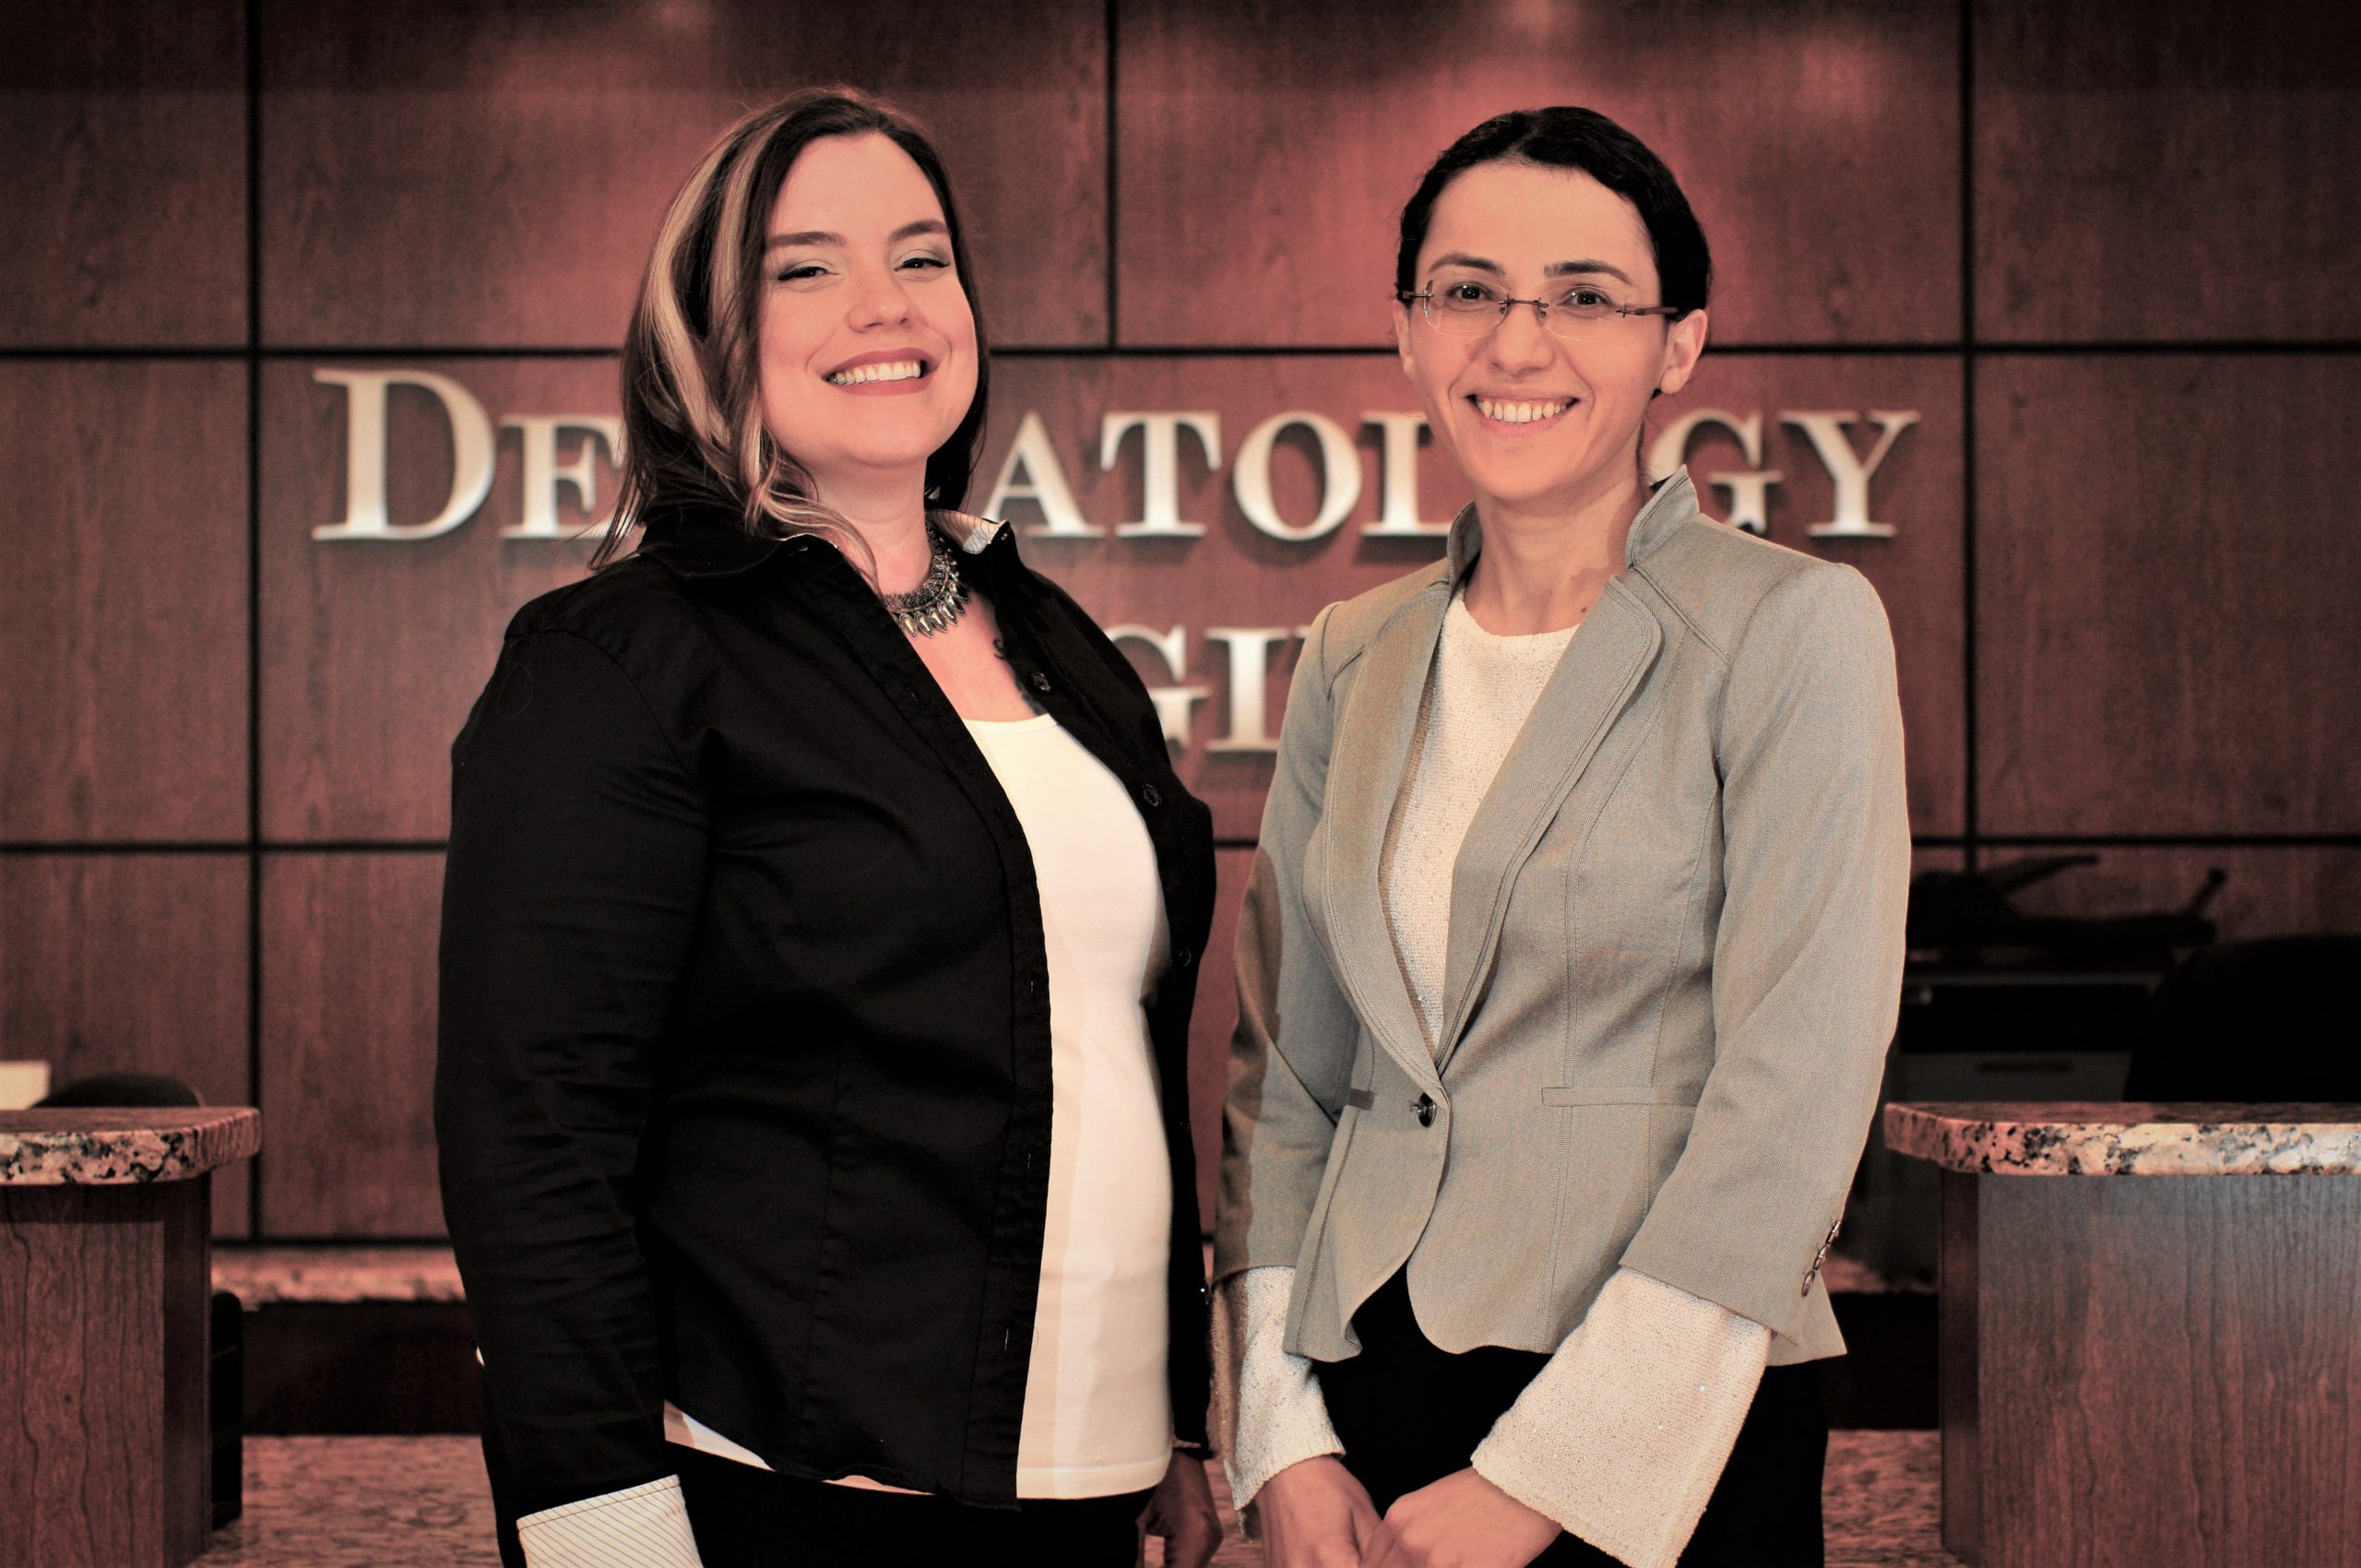 Dermatology of Virginia Practice Manager